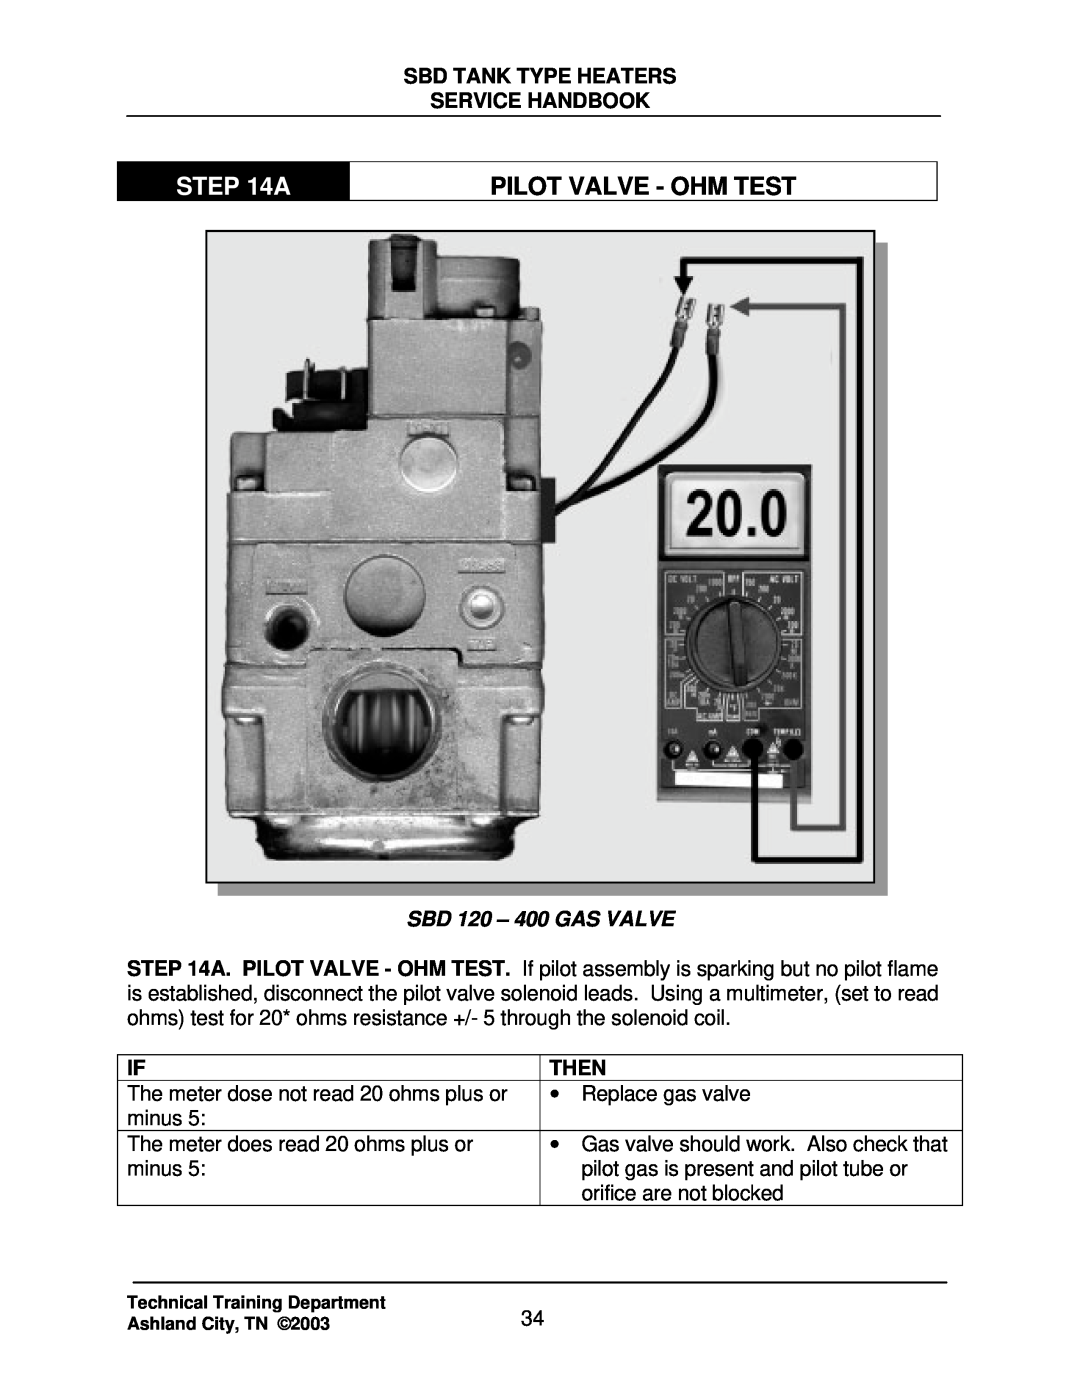 State Industries SBD71 120, SBD85 500 manual A, Pilot Valve - Ohm Test, Sbd Tank Type Heaters Service Handbook, Then 